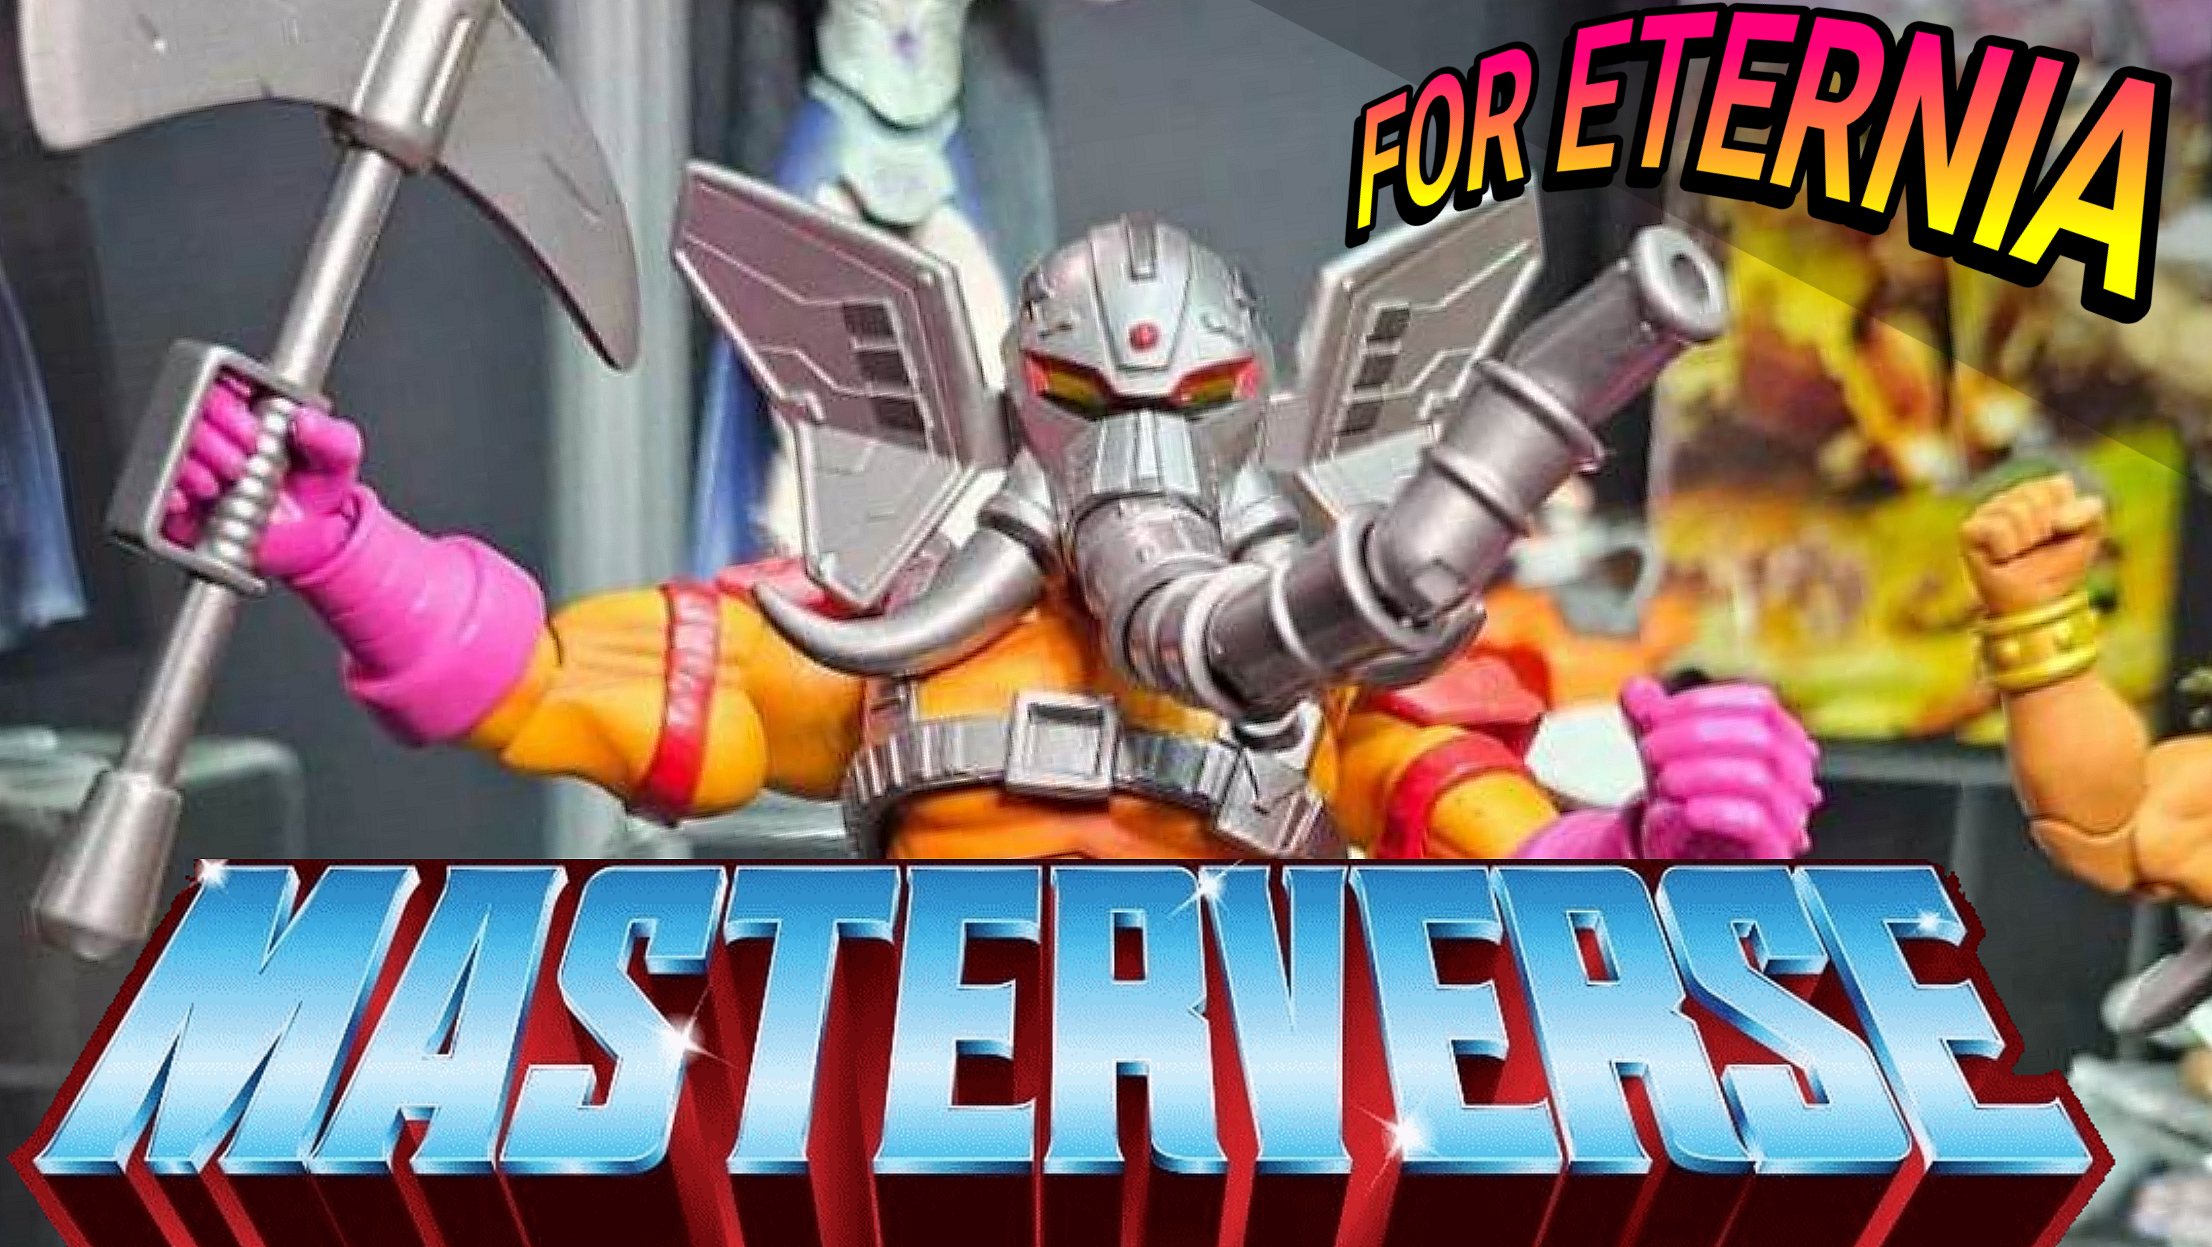 Masterverse New Eternia SNOUT SPOUT is coming to Mattel Creations on Tuesday, March 12th